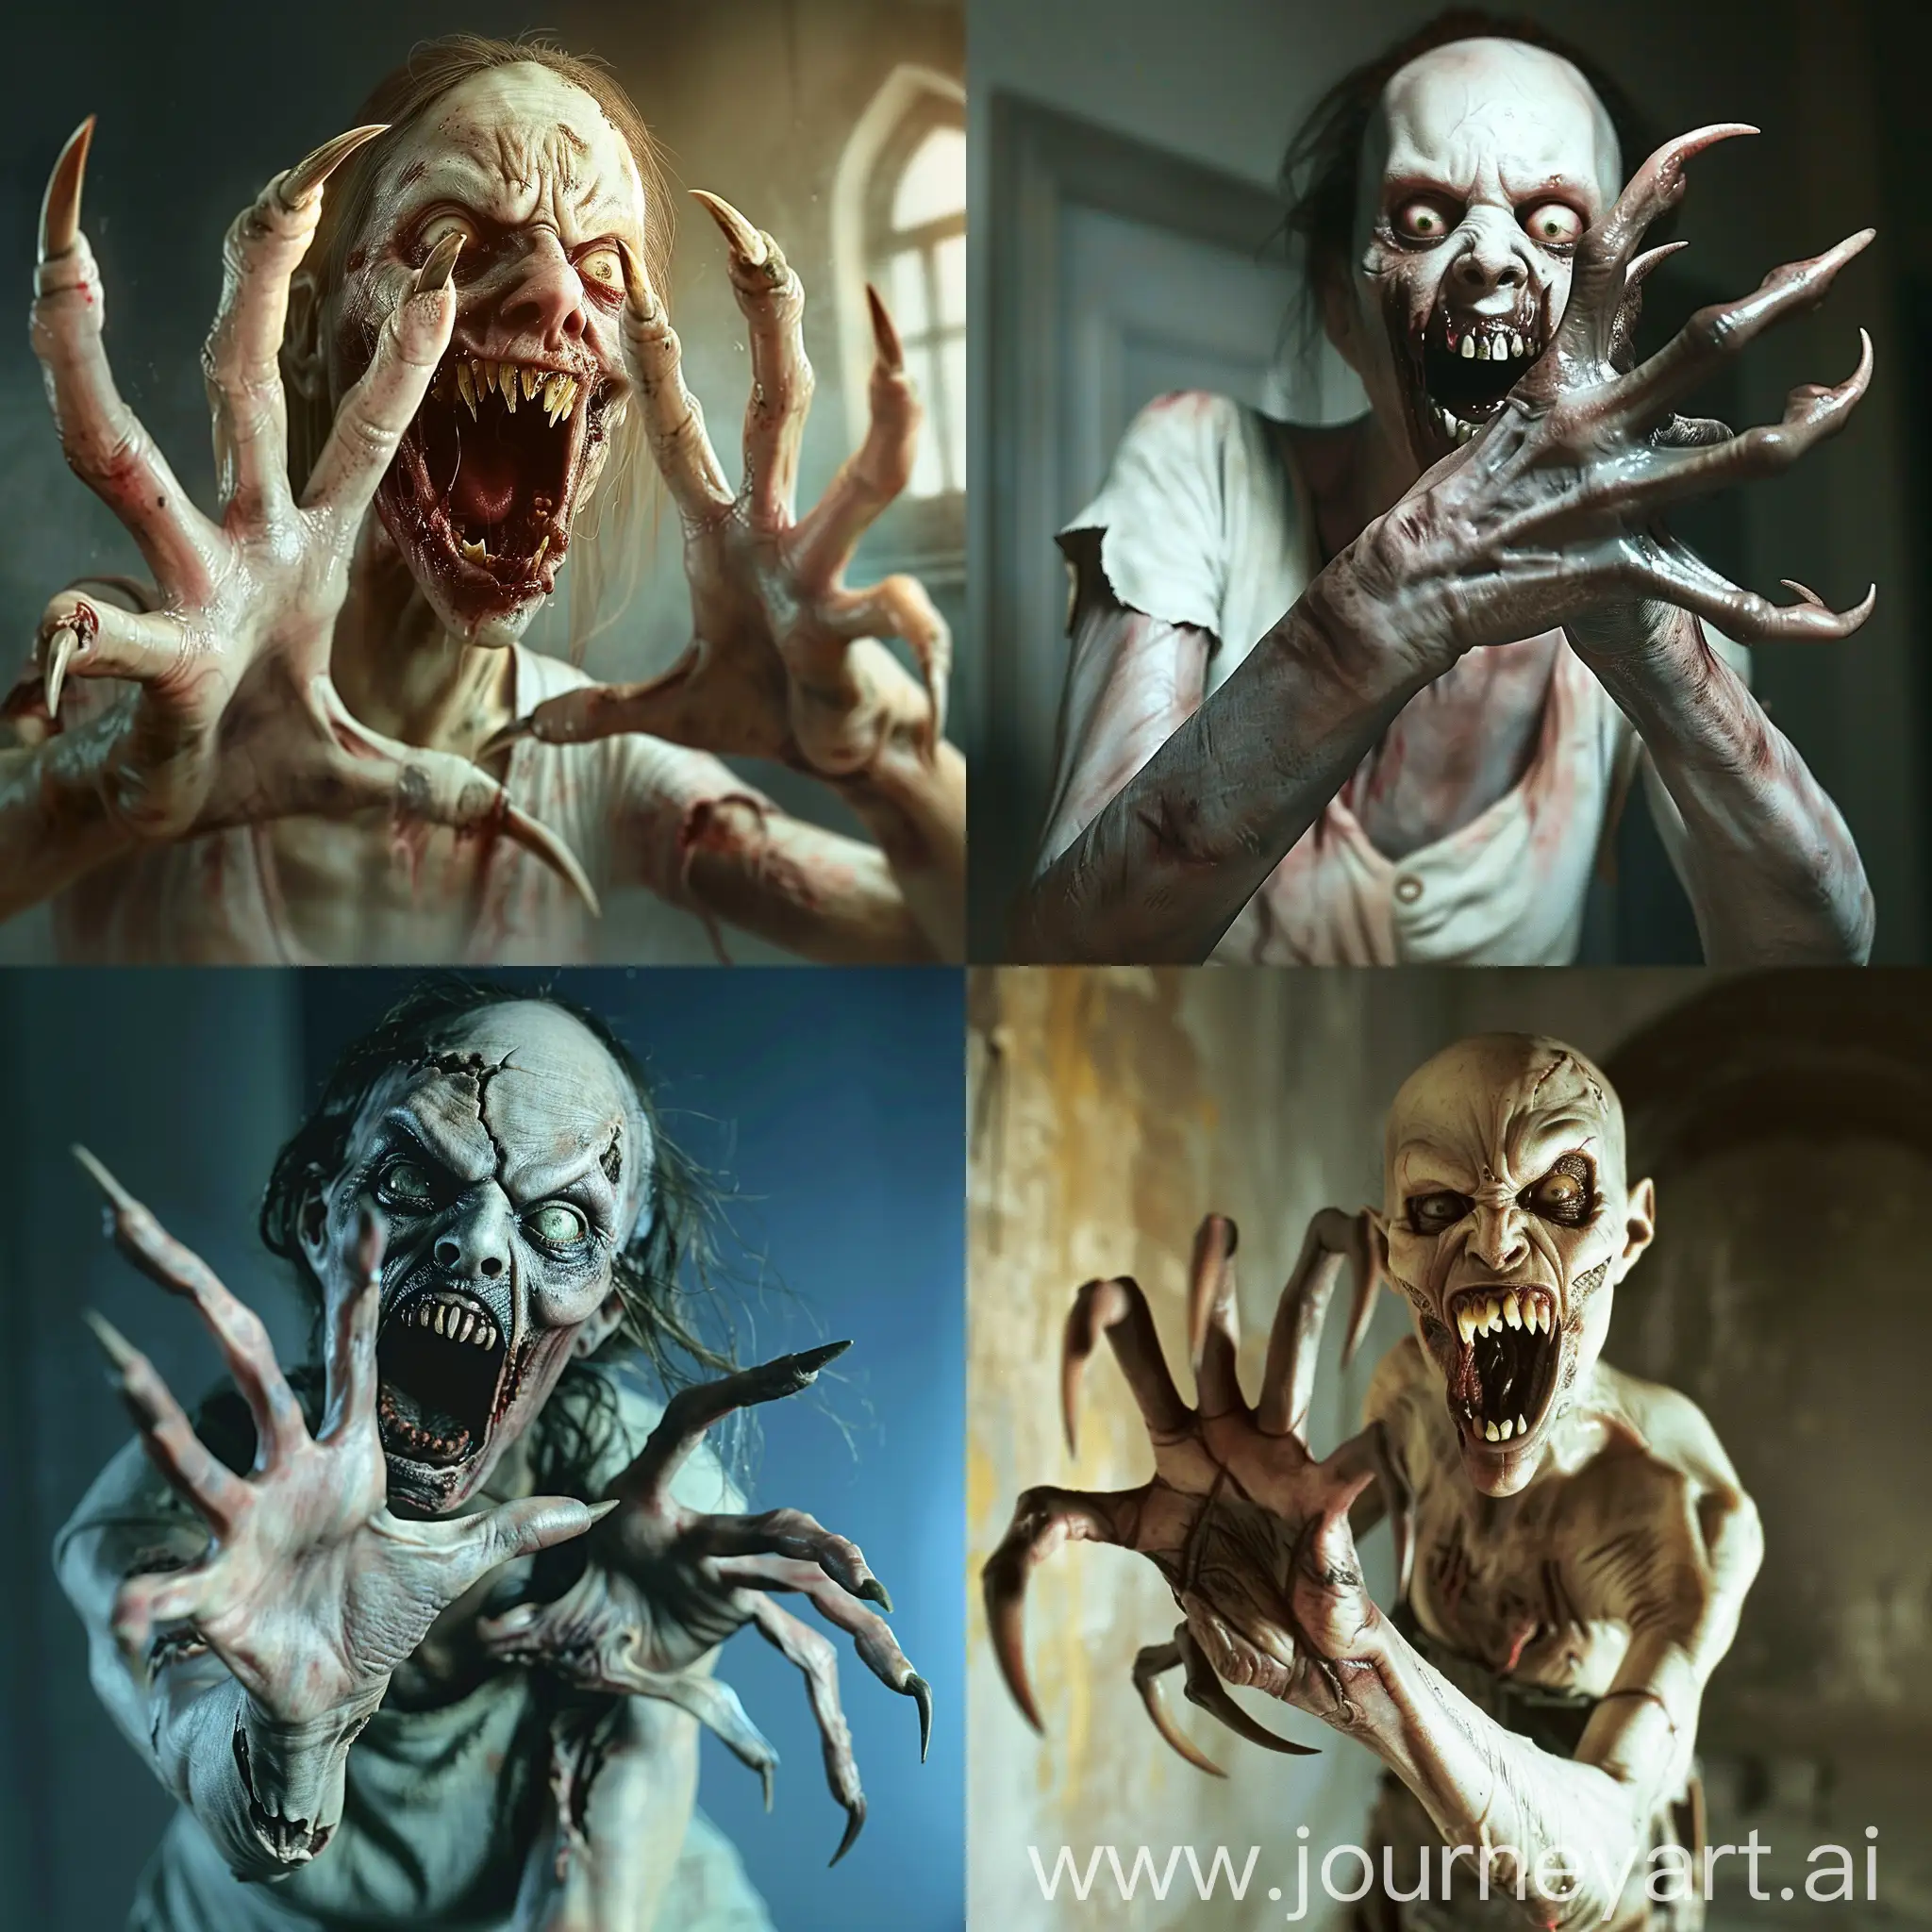 "Describe a zombie woman in a horror scene. She has long, curved pointed nails resembling claws on her five fingers. Her skin is pale and rotting, and her eyes are vacant. Her mouth is wide open, showcasing sharp, pointed teeth that are similar to fangs. Describe her attacking her victim." full anatomical. human hands, very clear without flaws with five fingers